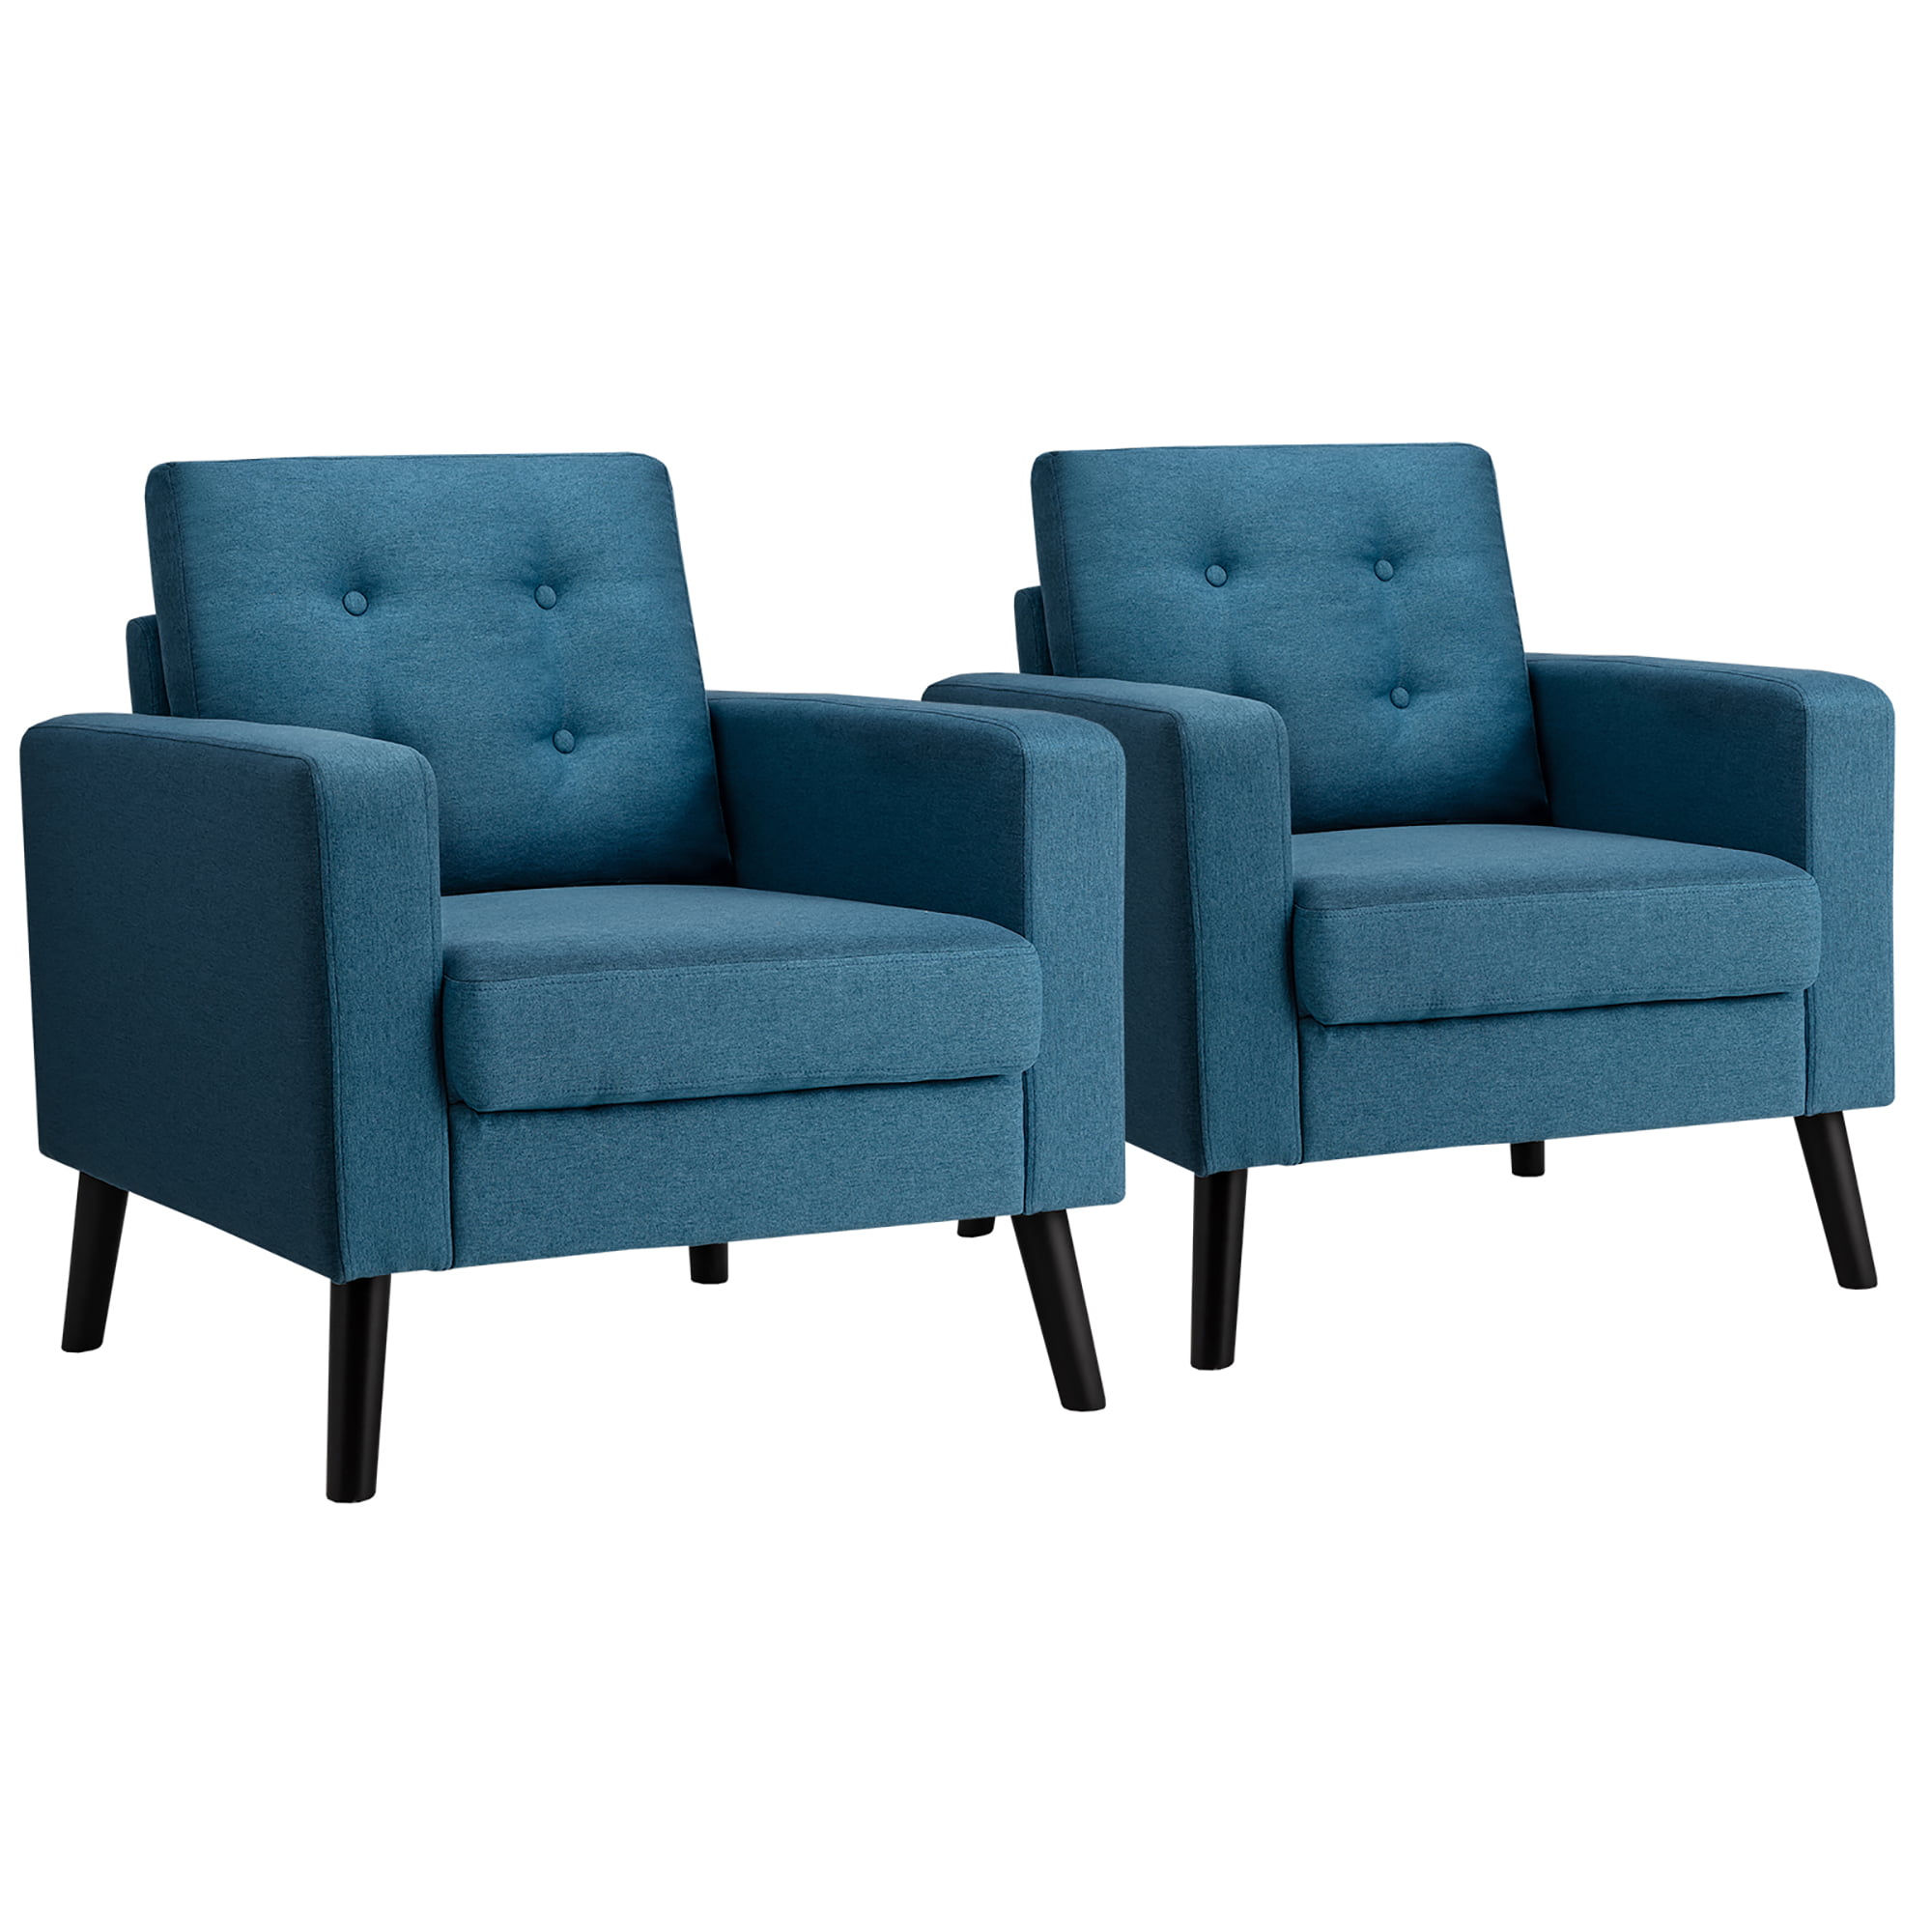 Costway Set of 2 Modern Tufted Accent Chair Linen